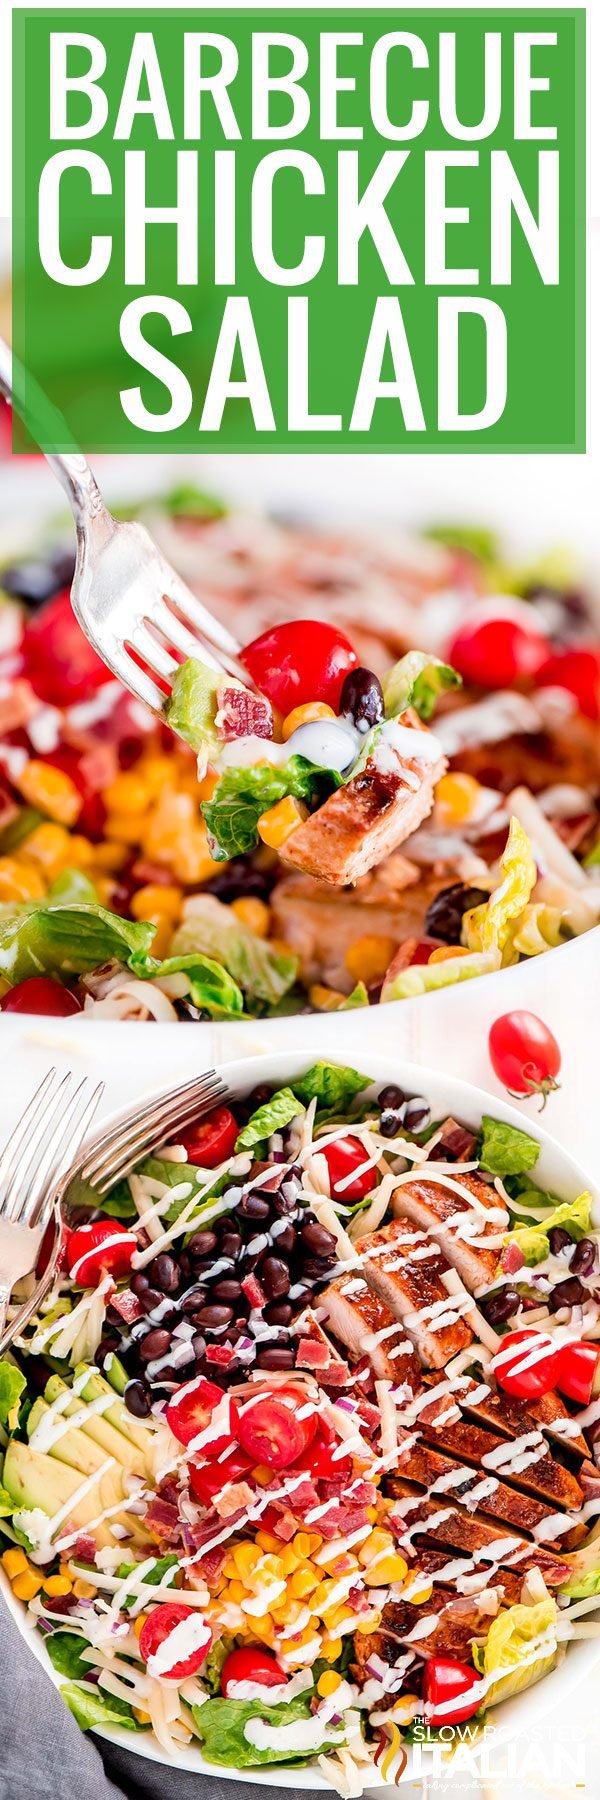 barbecue chicken salad -pin